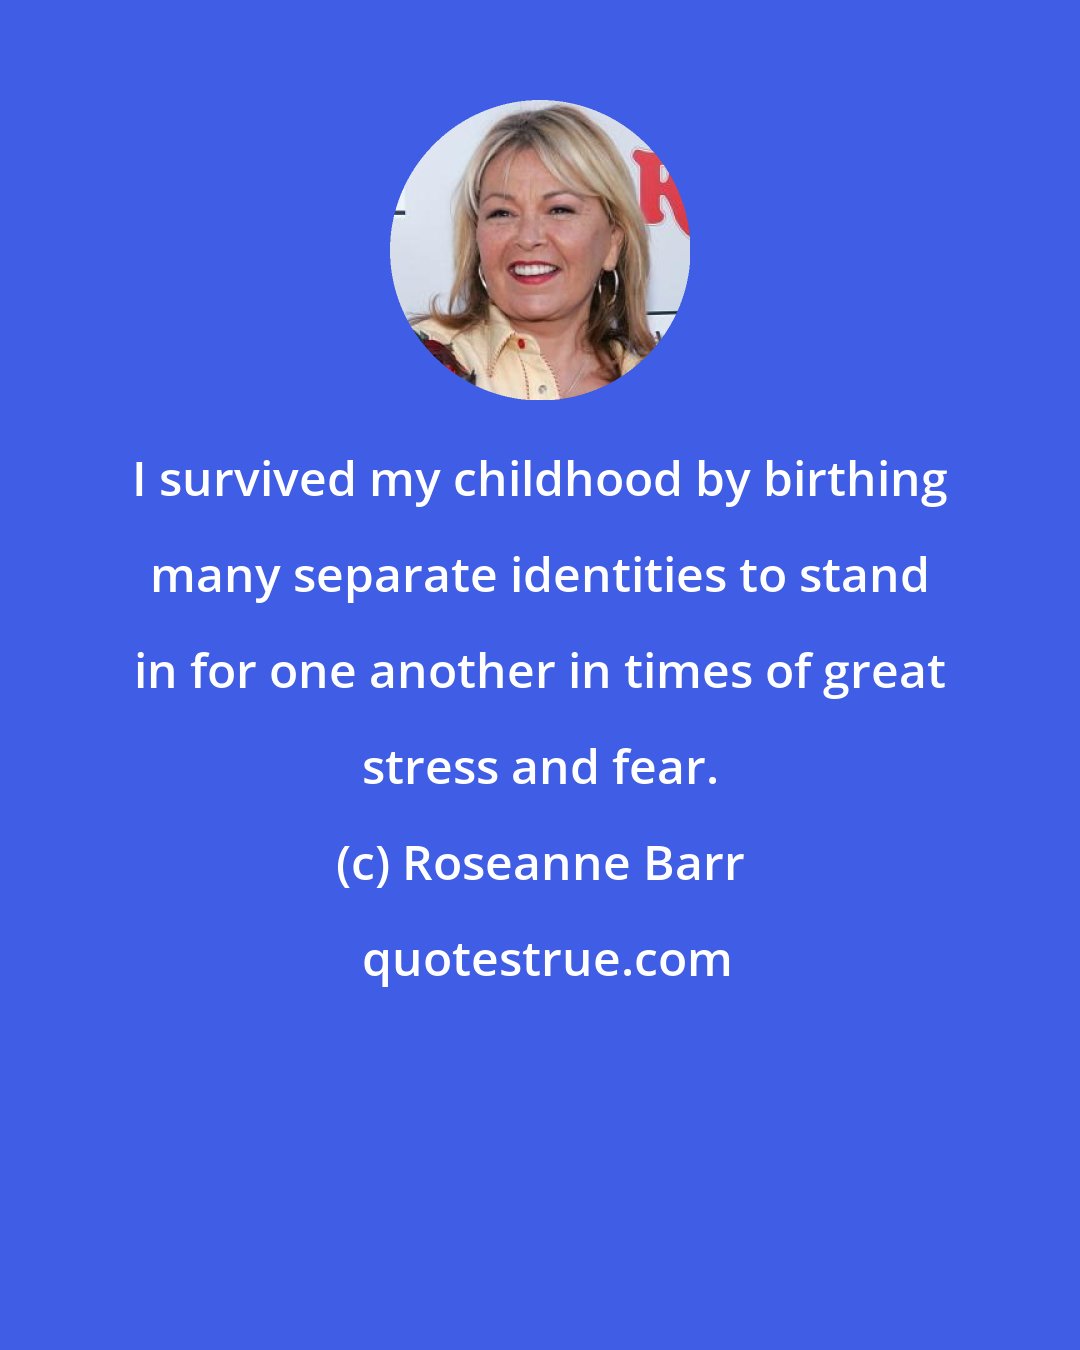 Roseanne Barr: I survived my childhood by birthing many separate identities to stand in for one another in times of great stress and fear.